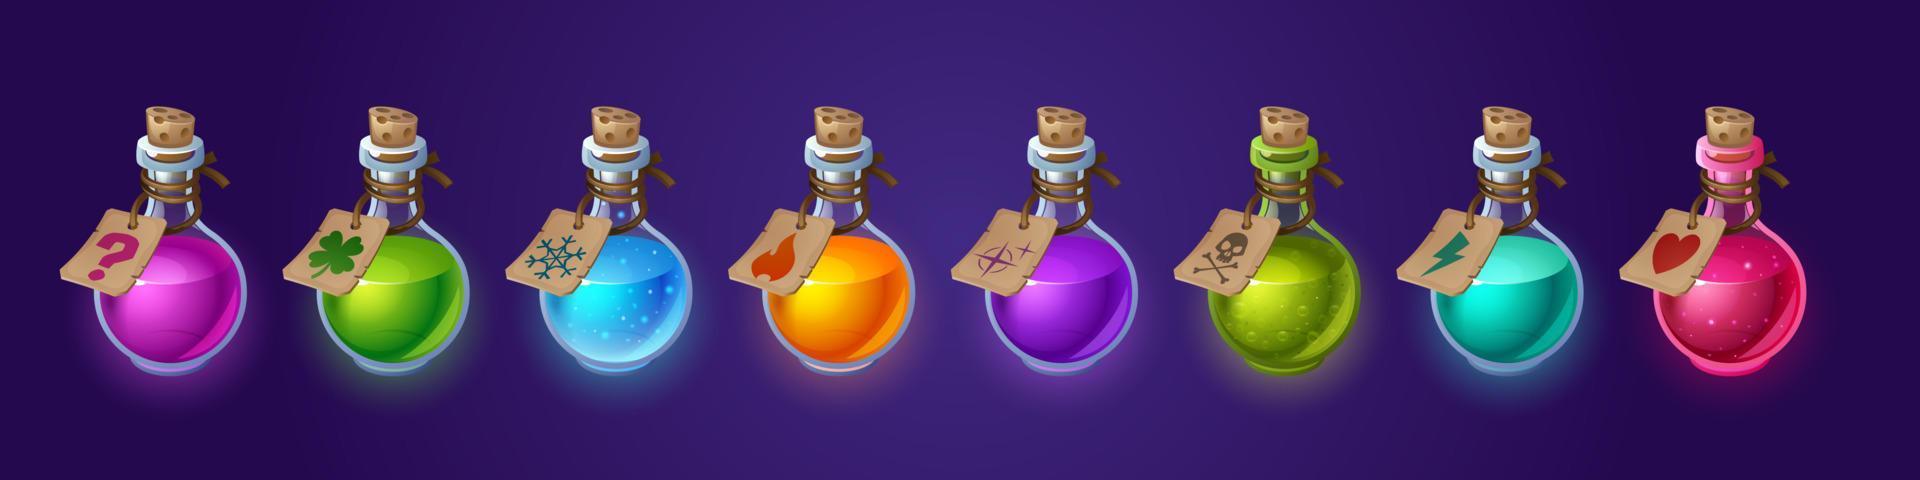 Potion glass bottles with magic elixir and tags vector